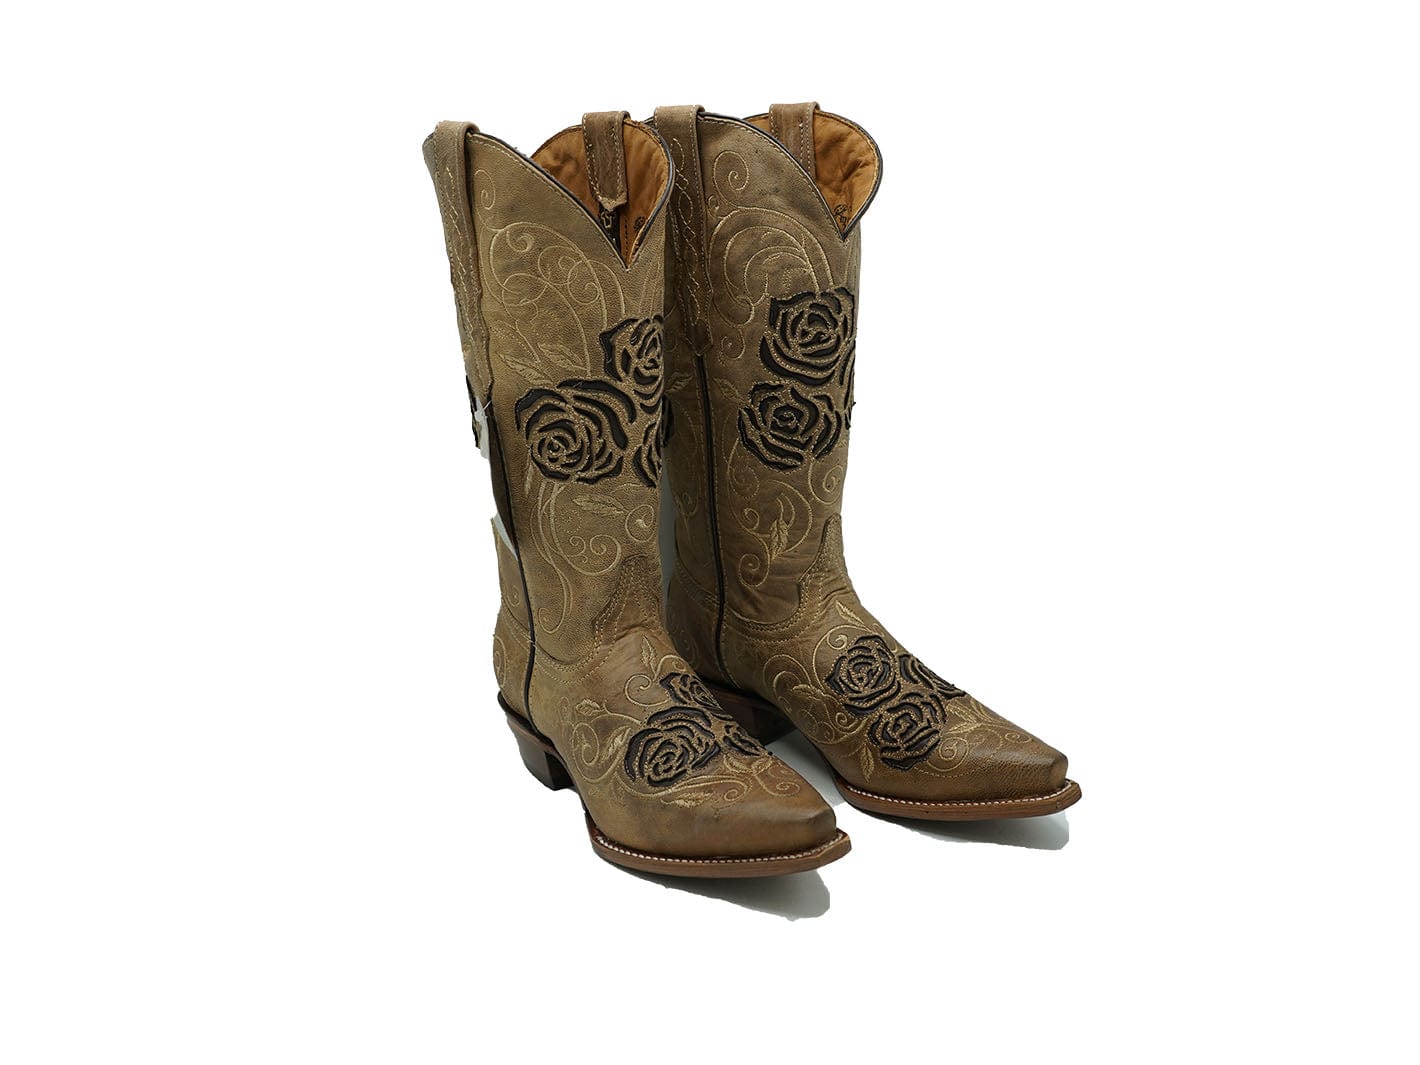 wolverine boots for work- white cowboy boots womens- twisted x work boots- western clothes women's- western wear ladies- types of cowboys hats- square toe western boots- snapback mens hat- size of pants chart- women's western outfits- women's western clothing- big and tall men's apparel- womens white cowgirl boots- womens long vest- dress pants for men-